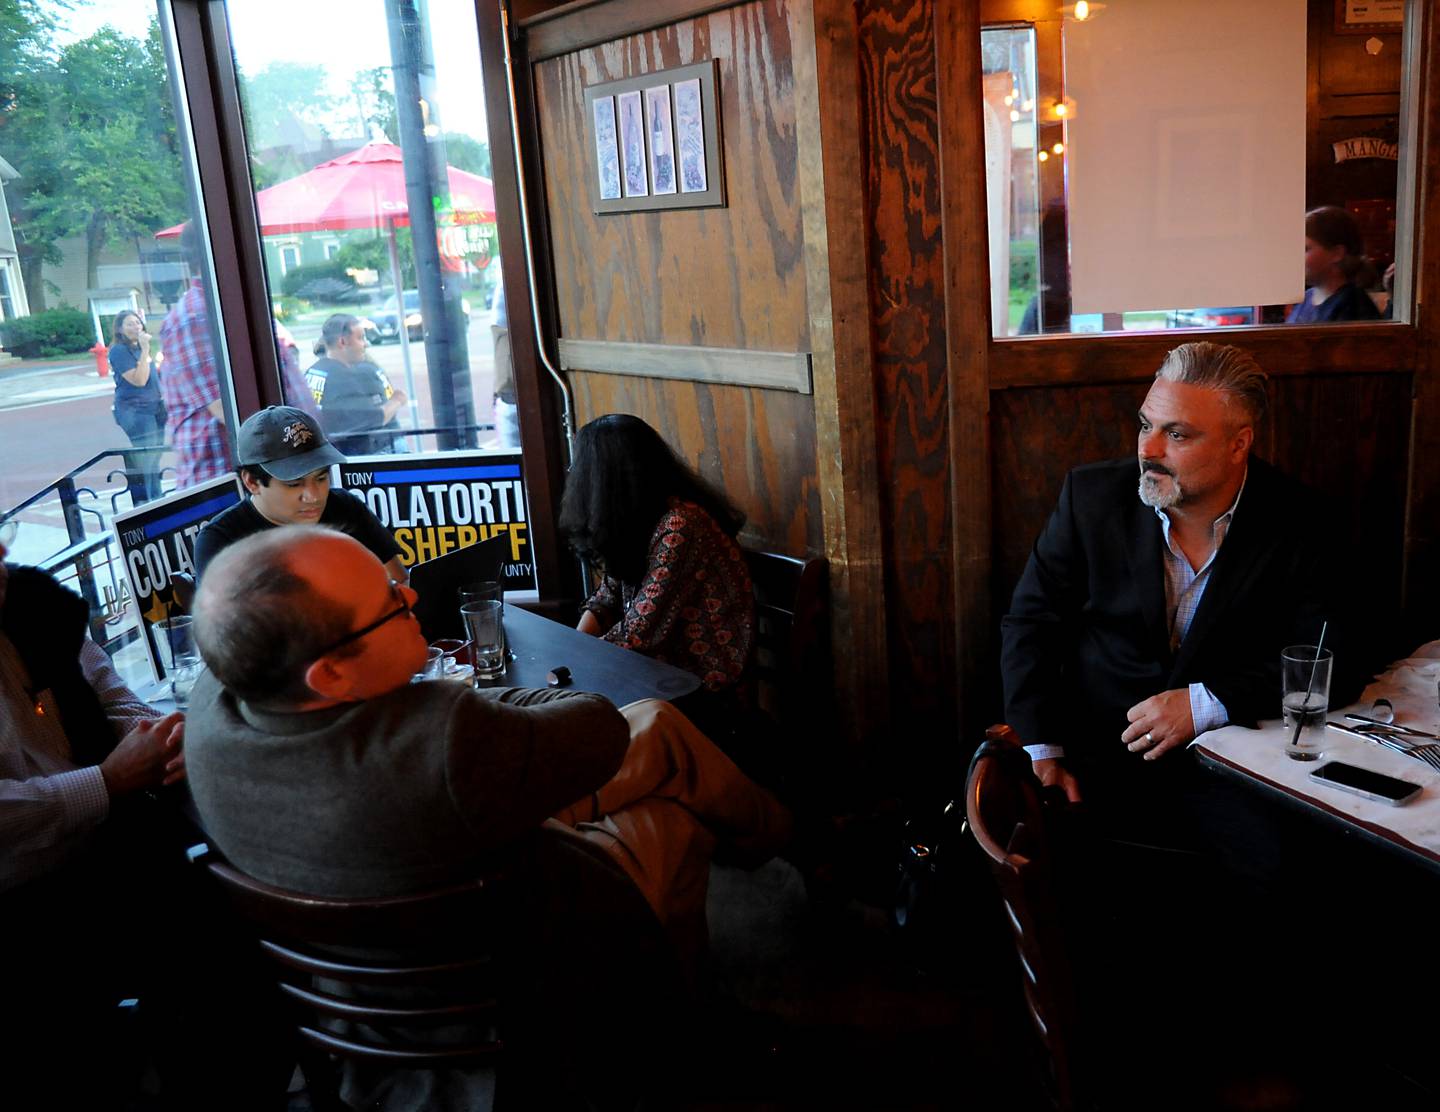 Tony Colatorti, right, talks with supporters during his primary election night watch party Tuesday June 28, 2022, at Cucina Bella, 220 S. Main St. in Algonquin. Colatorti, who owns Cucina Bella, was one of two  Republican candidates running to become McHenry County’s next sheriff.